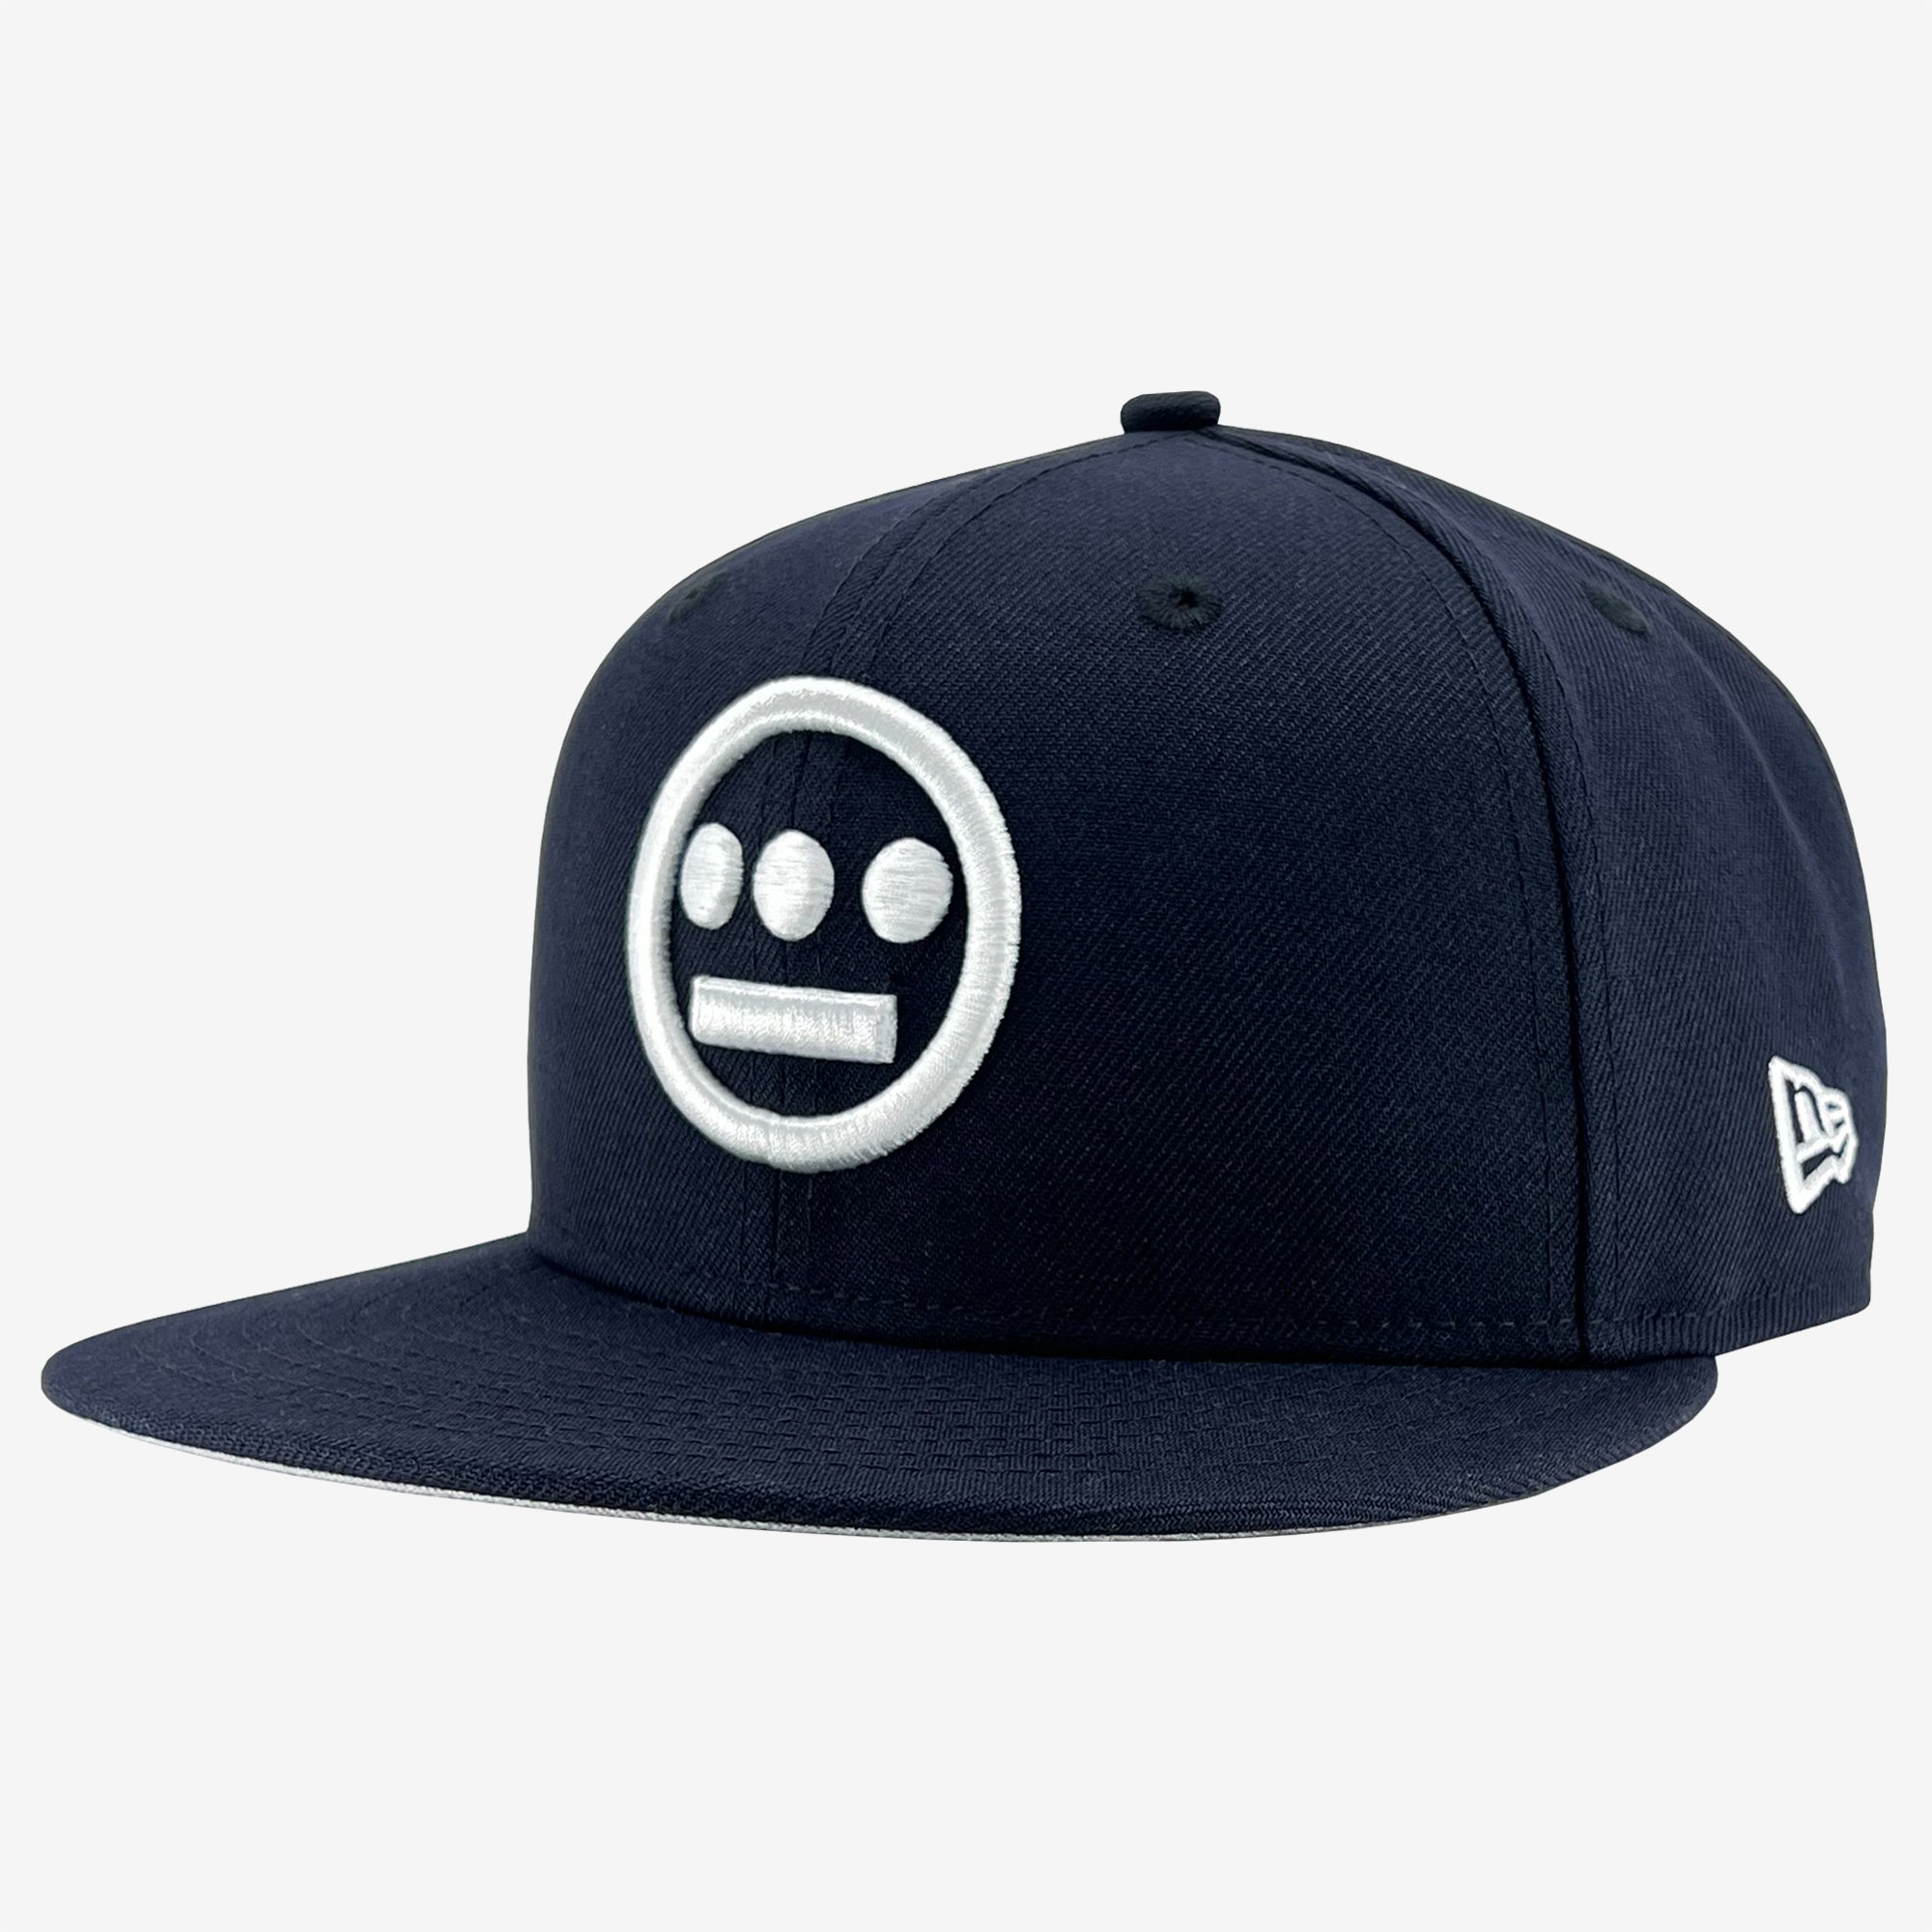 Side view of navy New Era cap with white embroidered Hieroglyphics hip-hop logo on the crown.